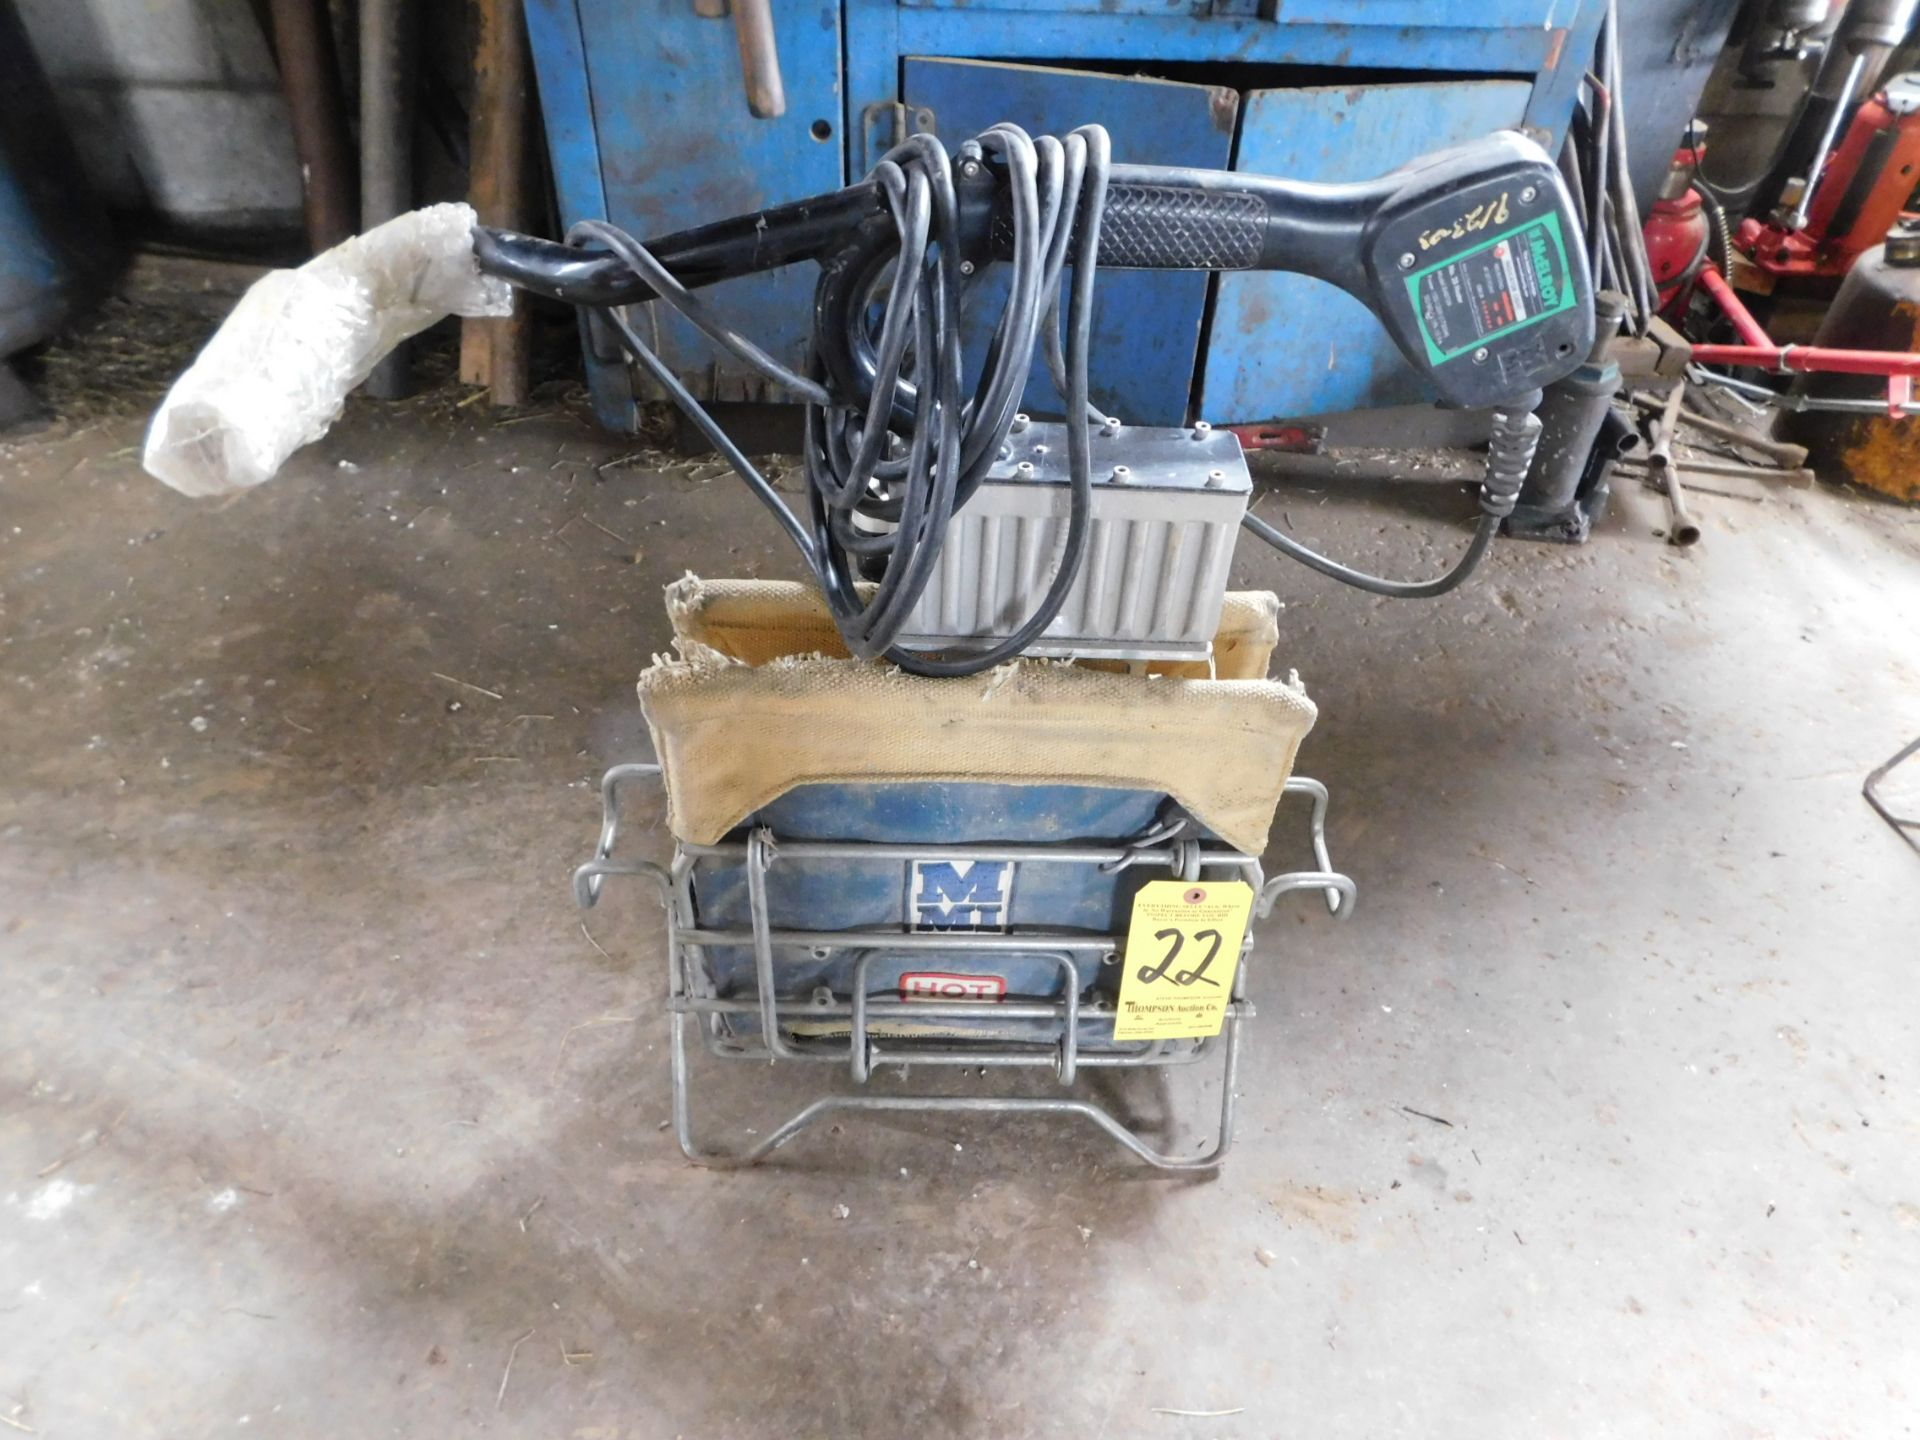 McElroy #28 Heater, 2"-8", with Carrier